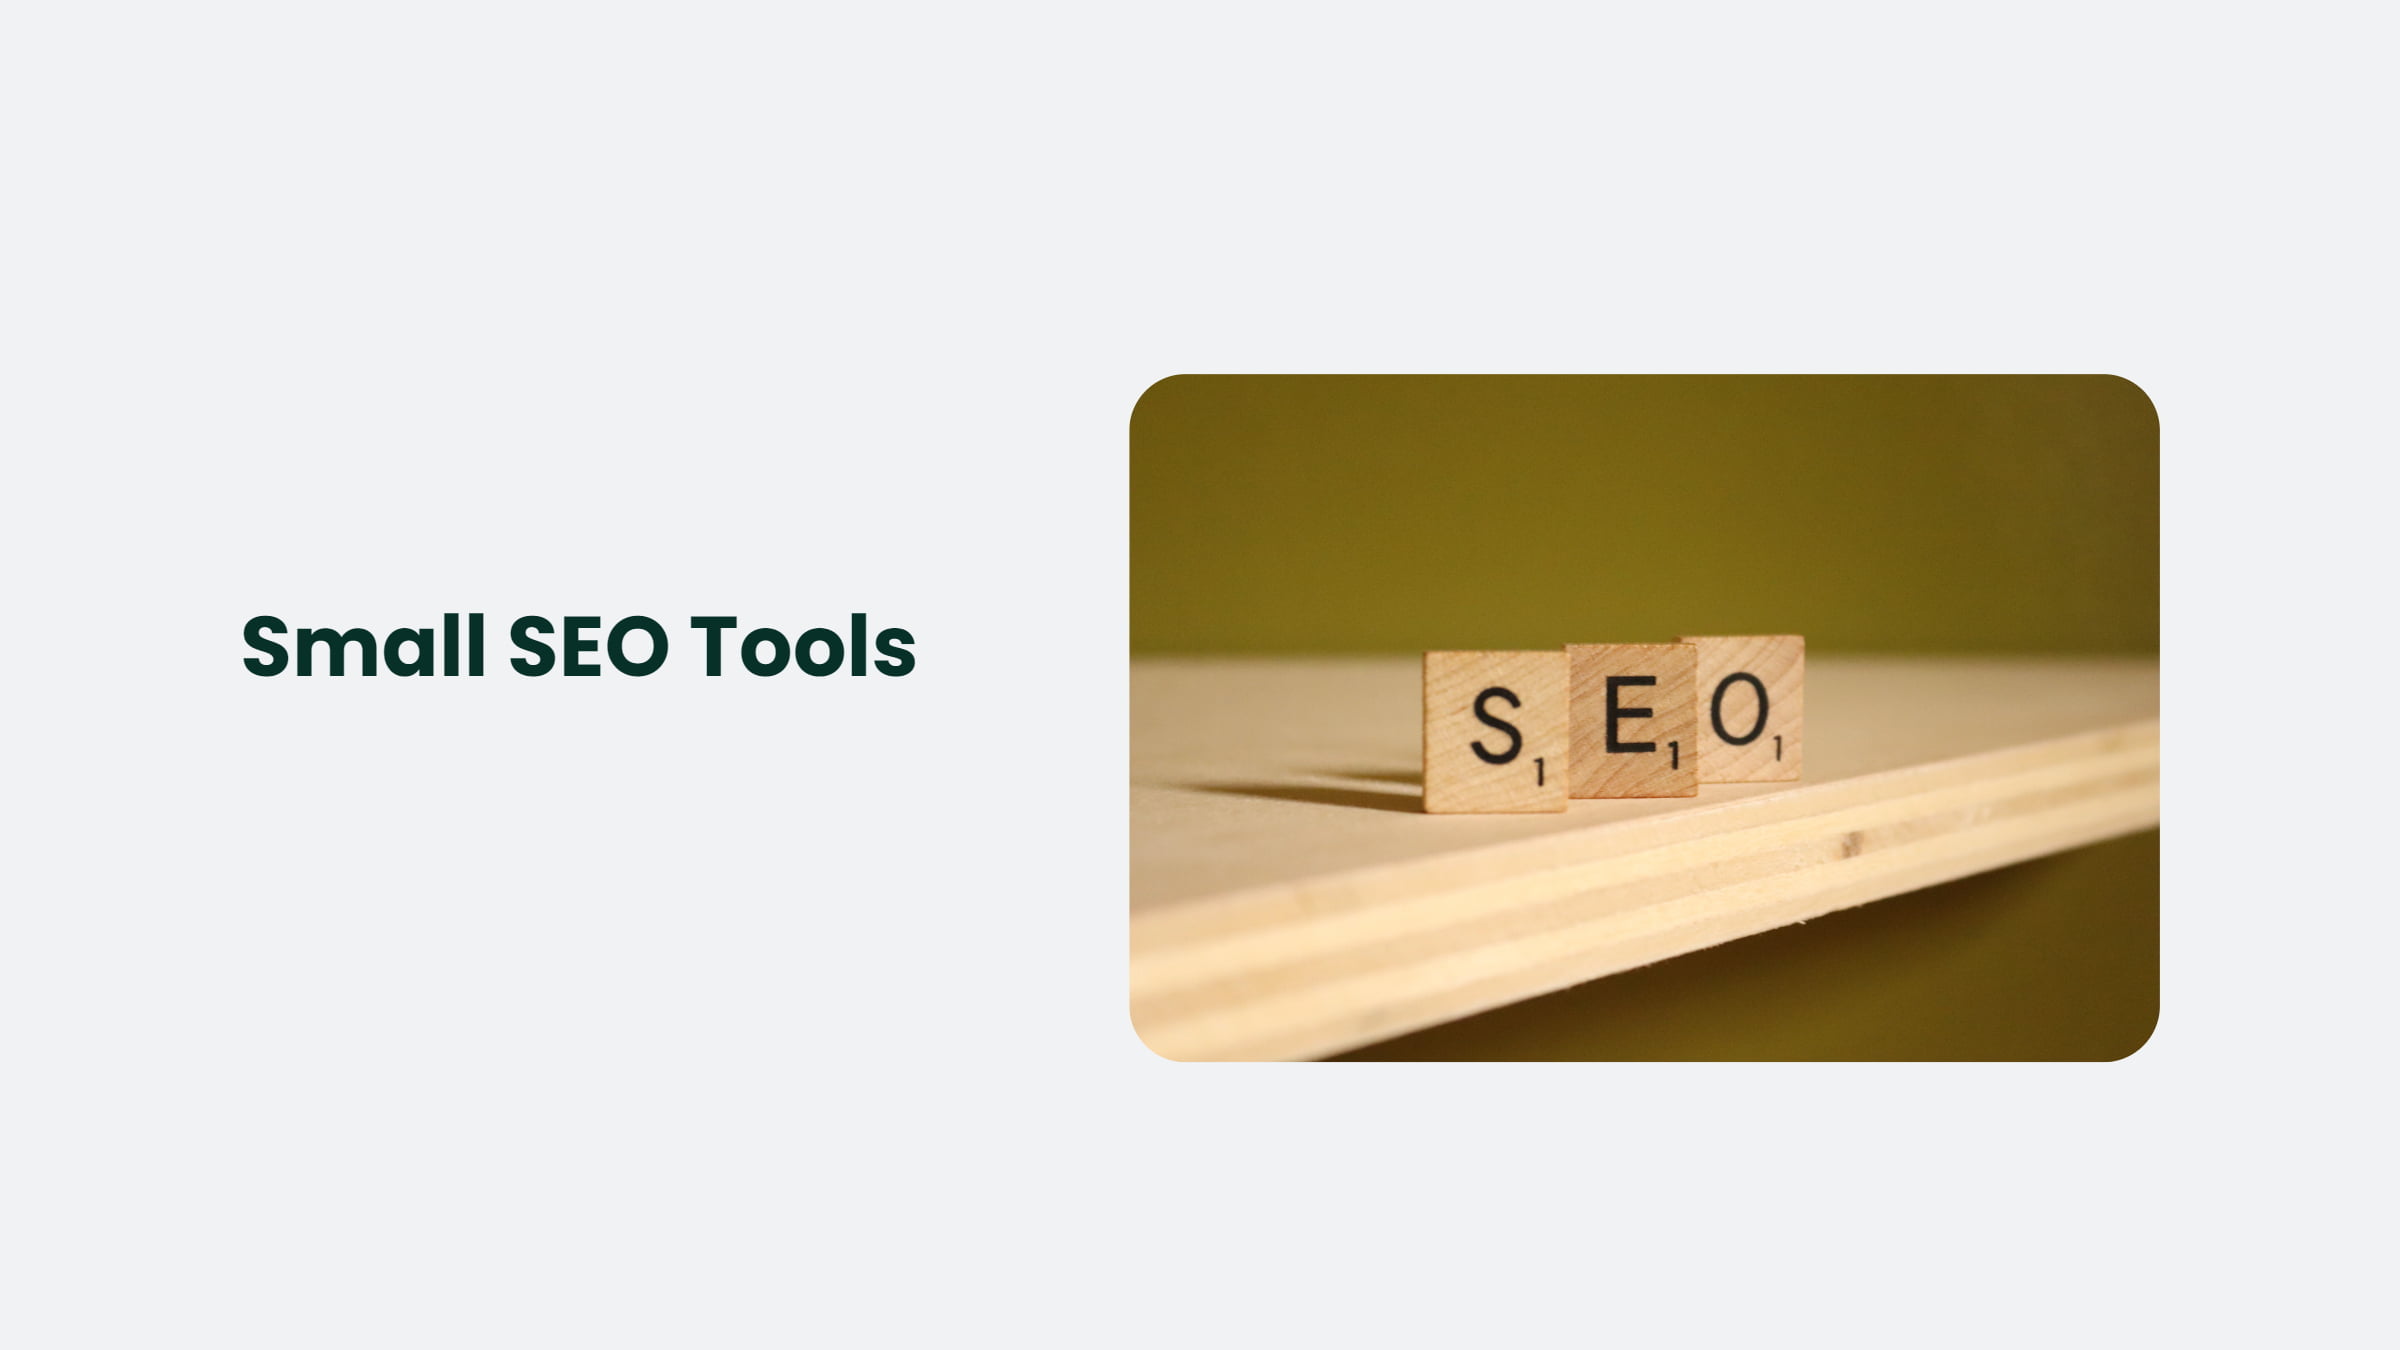 Small Seo Tools: What Can They Do For You?